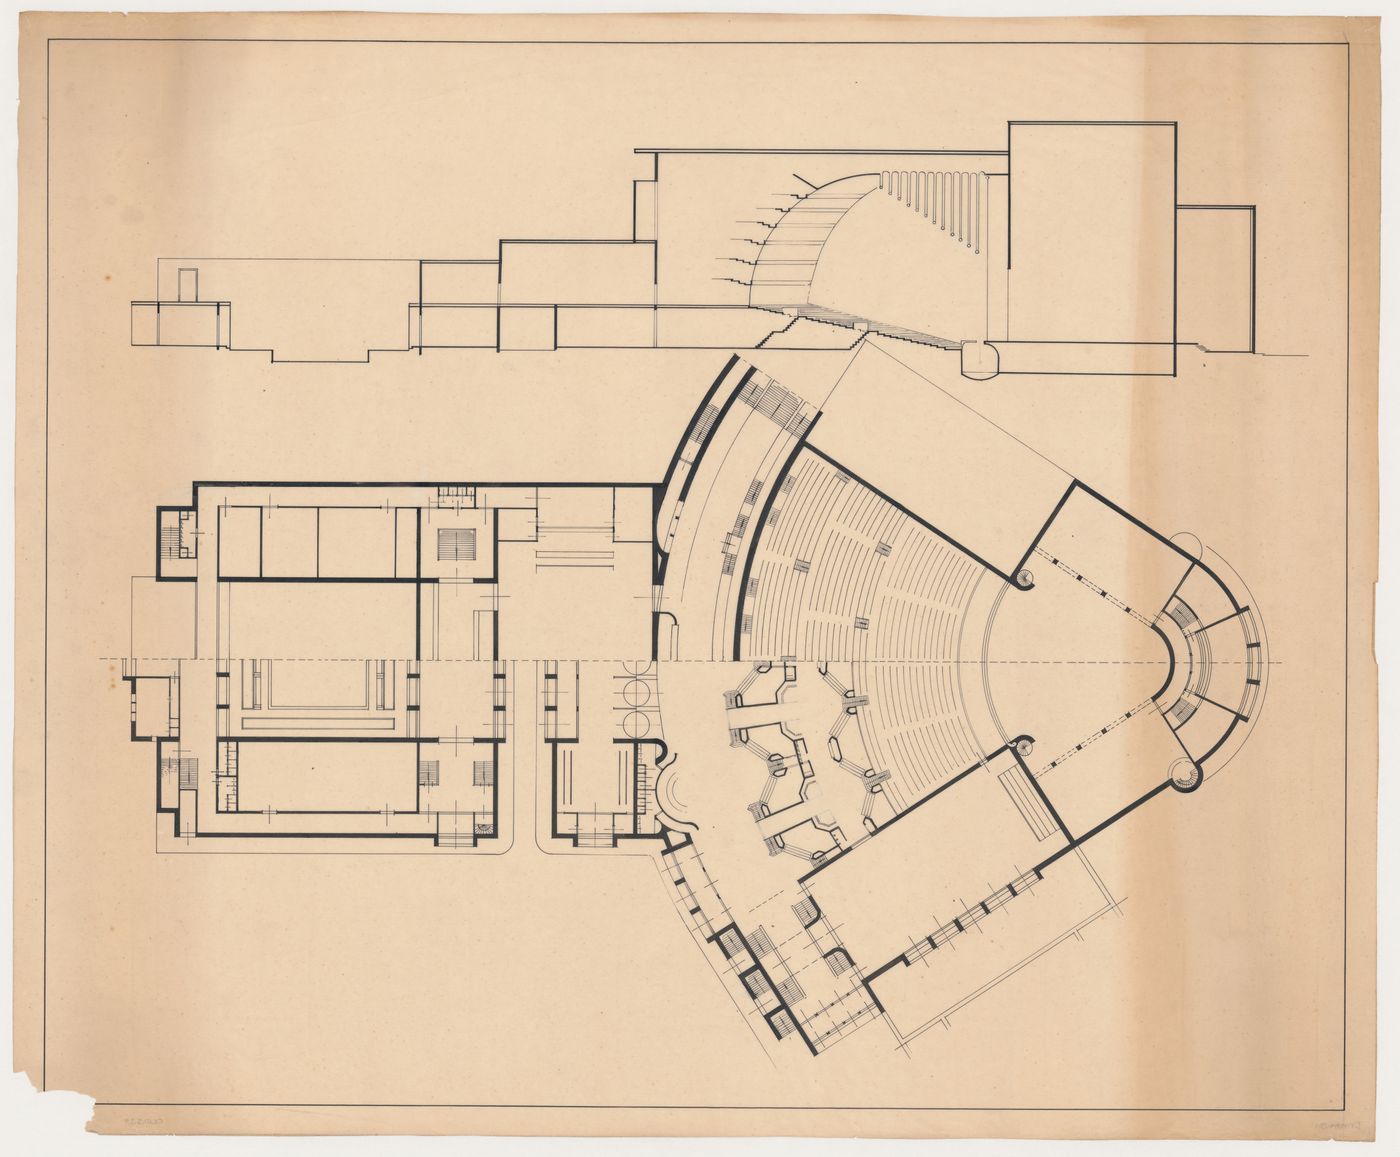 Half plans and longitudinal section for the 1924 design for People's University, Rotterdam, Netherlands